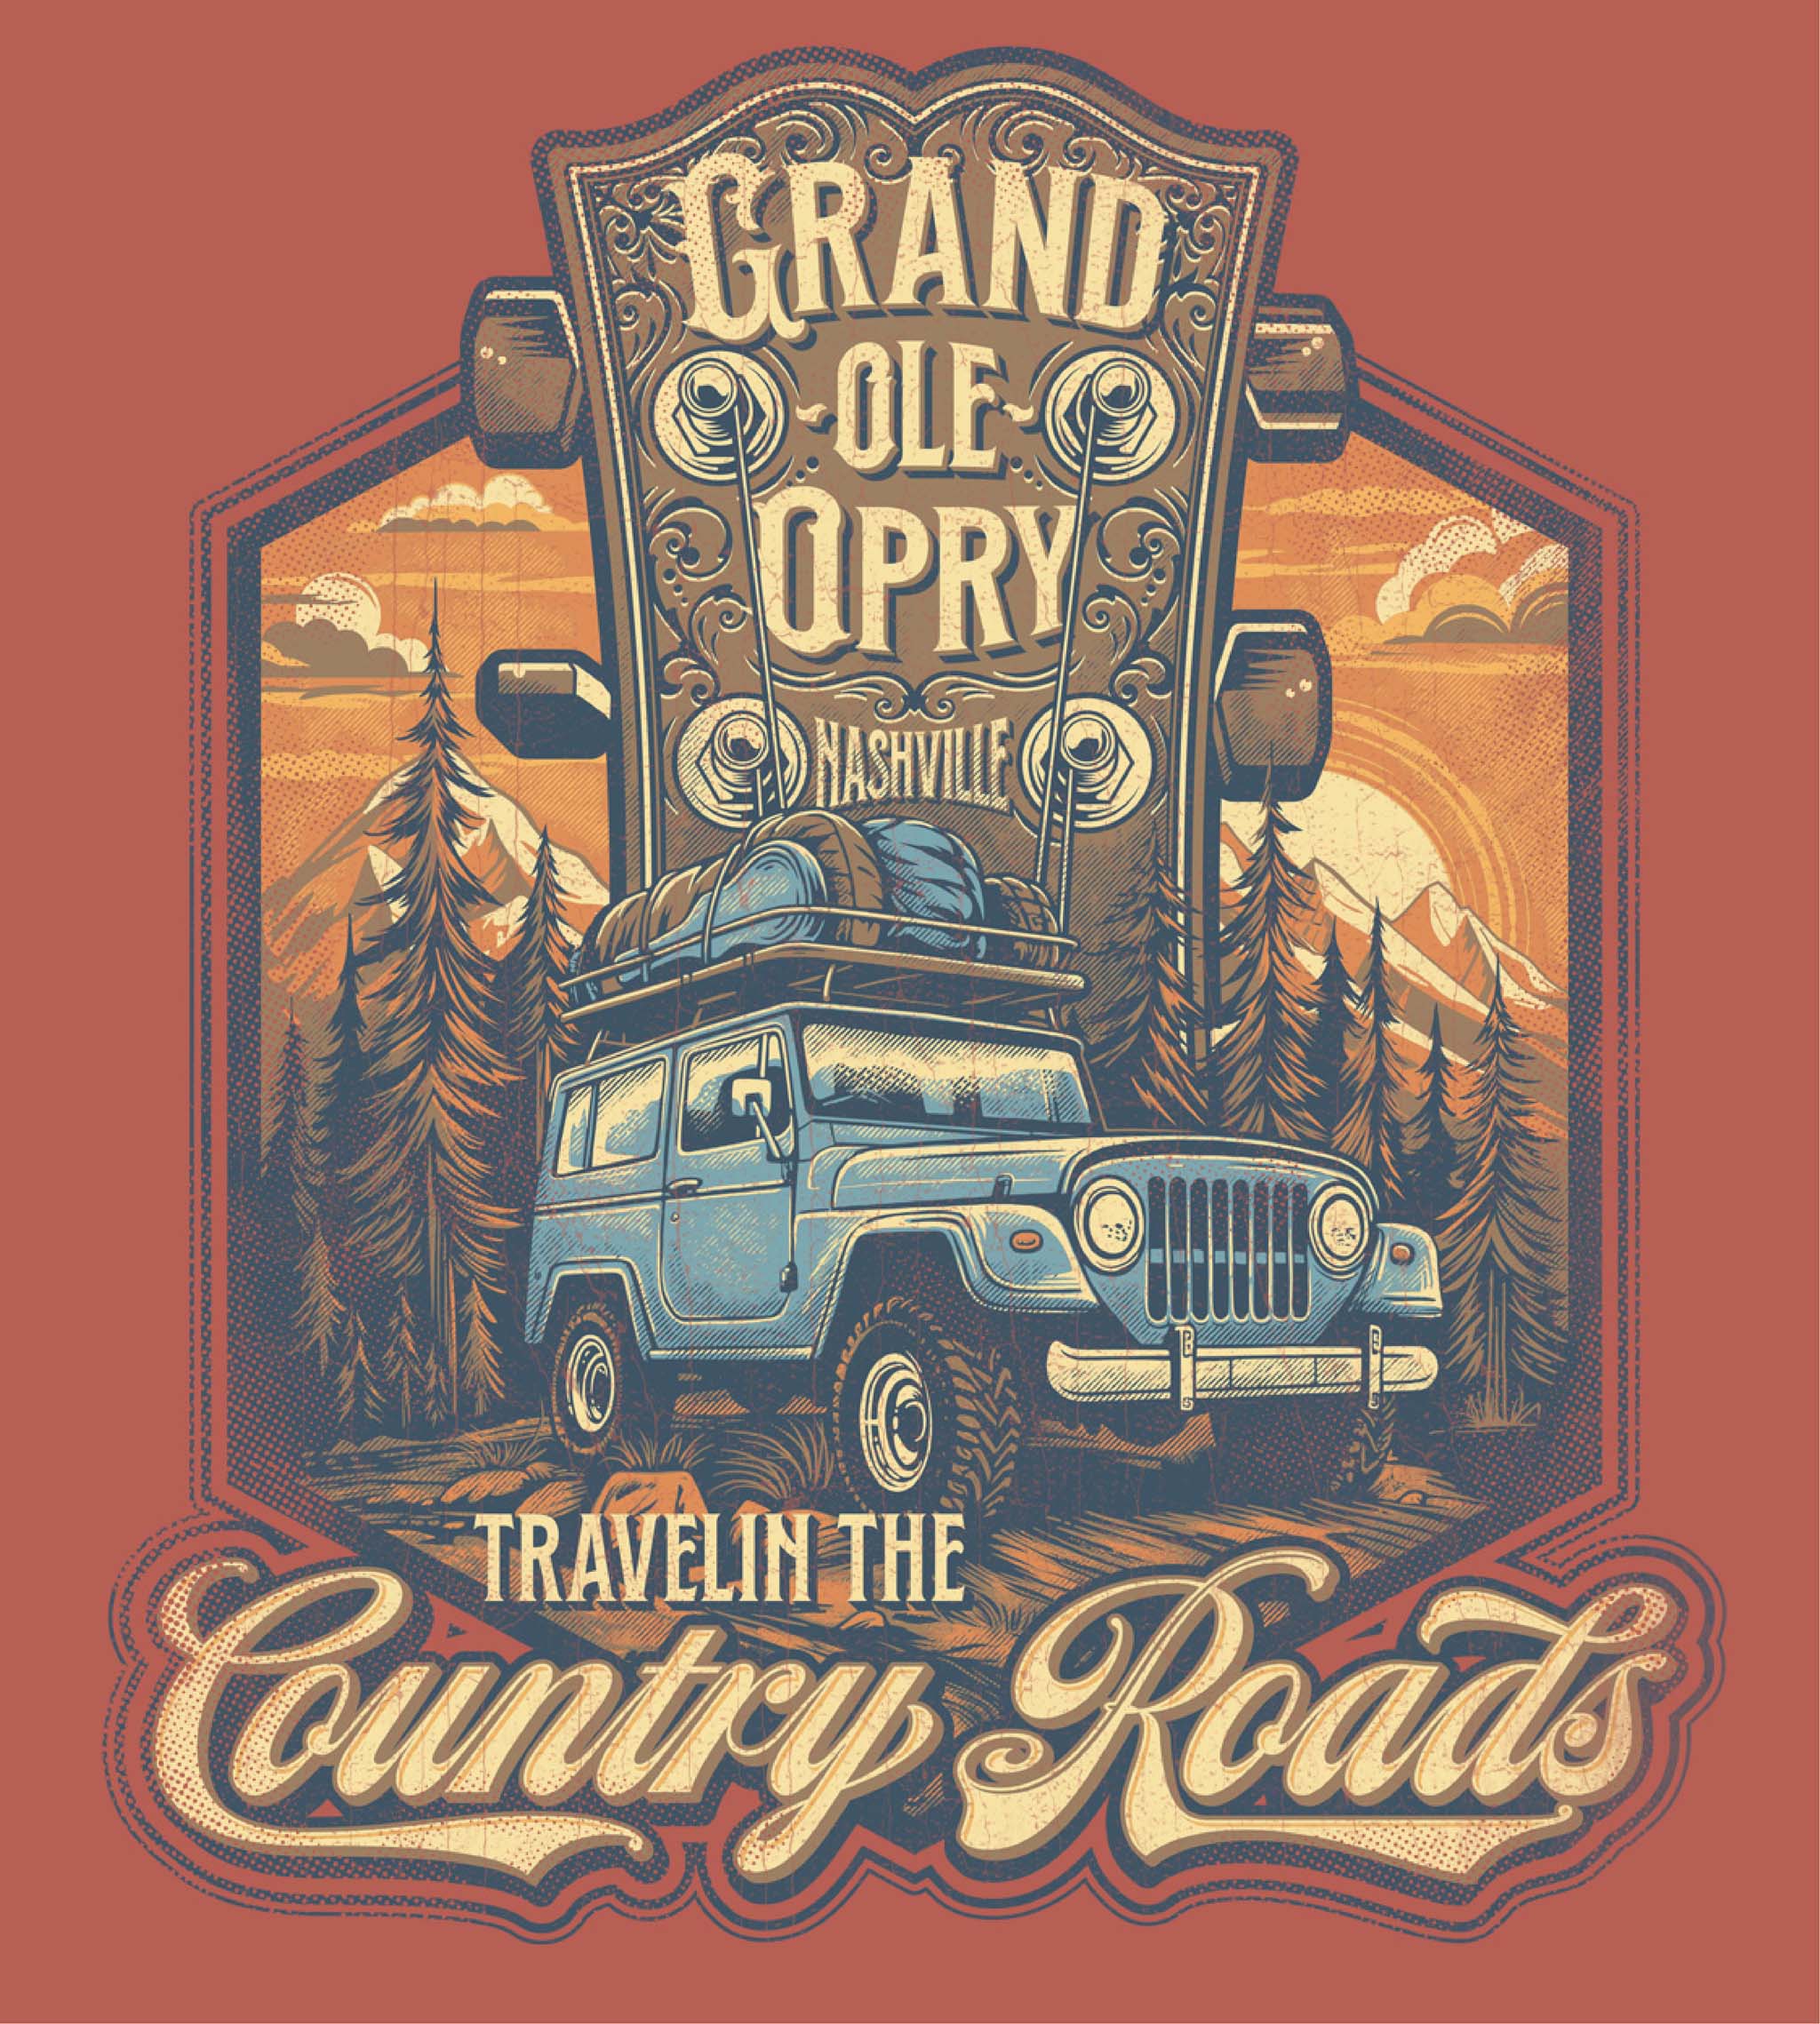 Opry Country Roads Tour T-Shirt